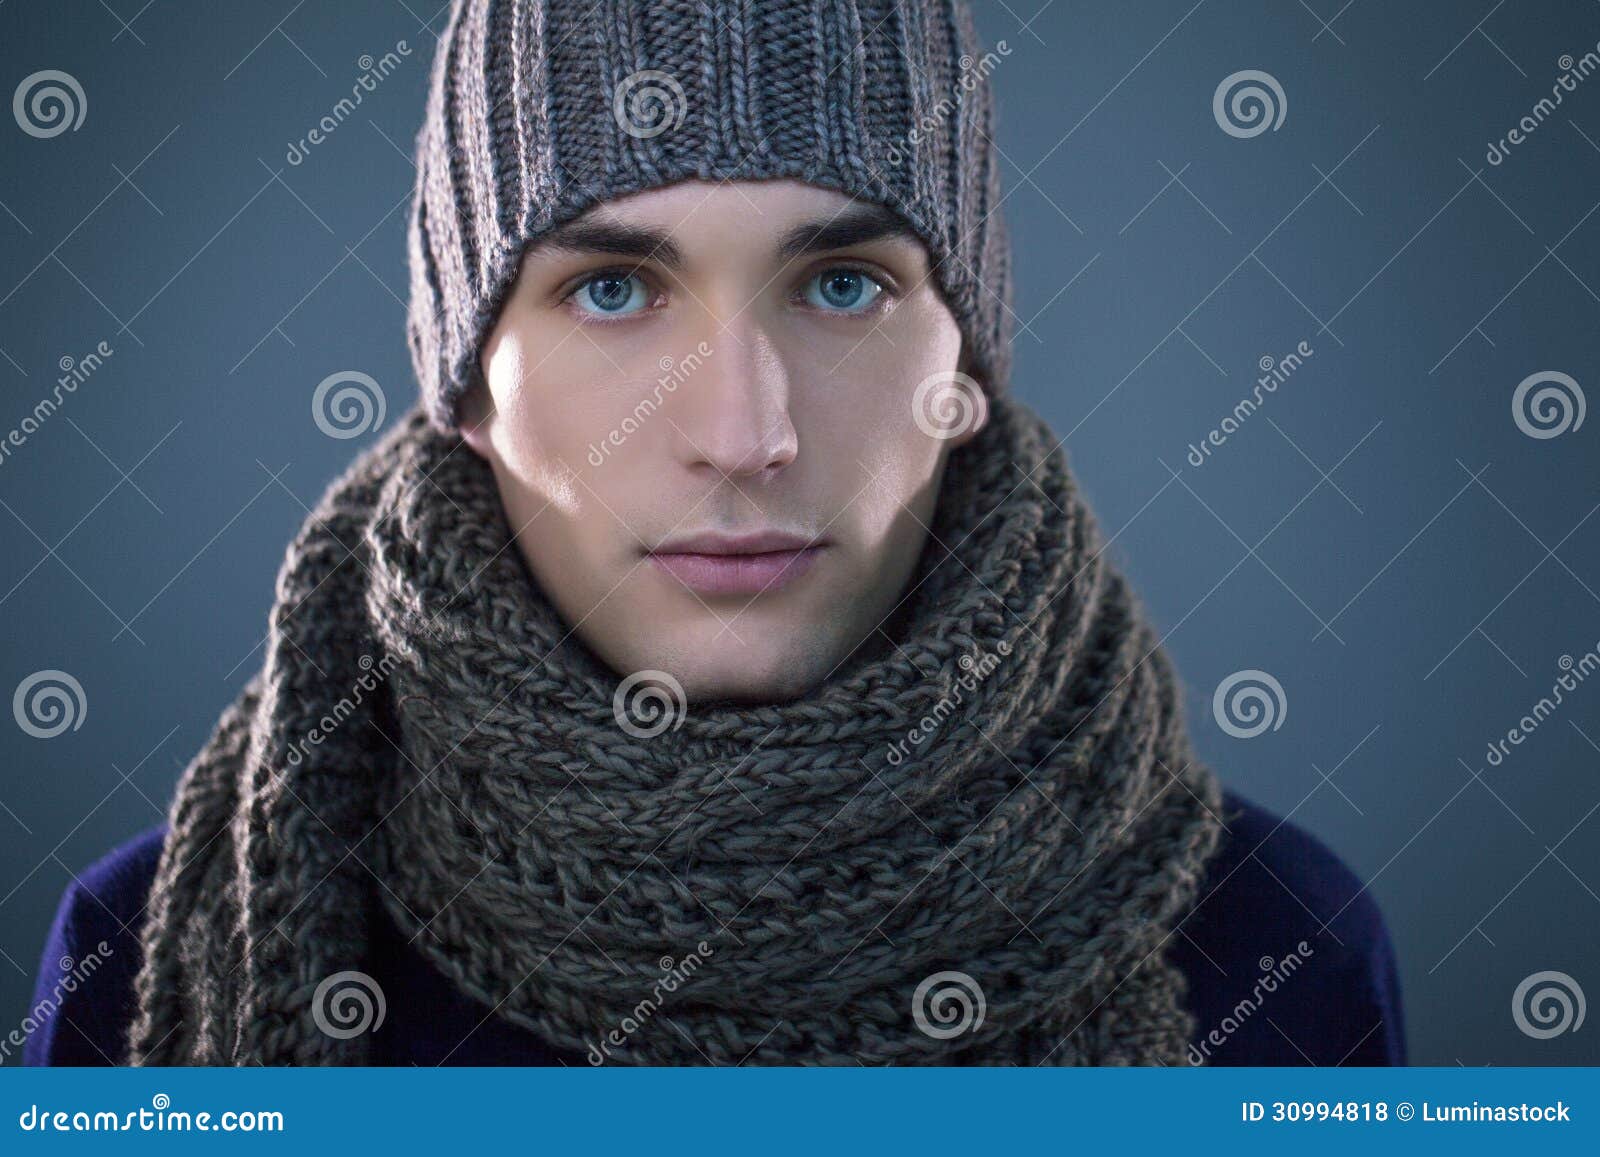 Man in Winter Clothes stock photo. Image of cold, beautiful - 30994818